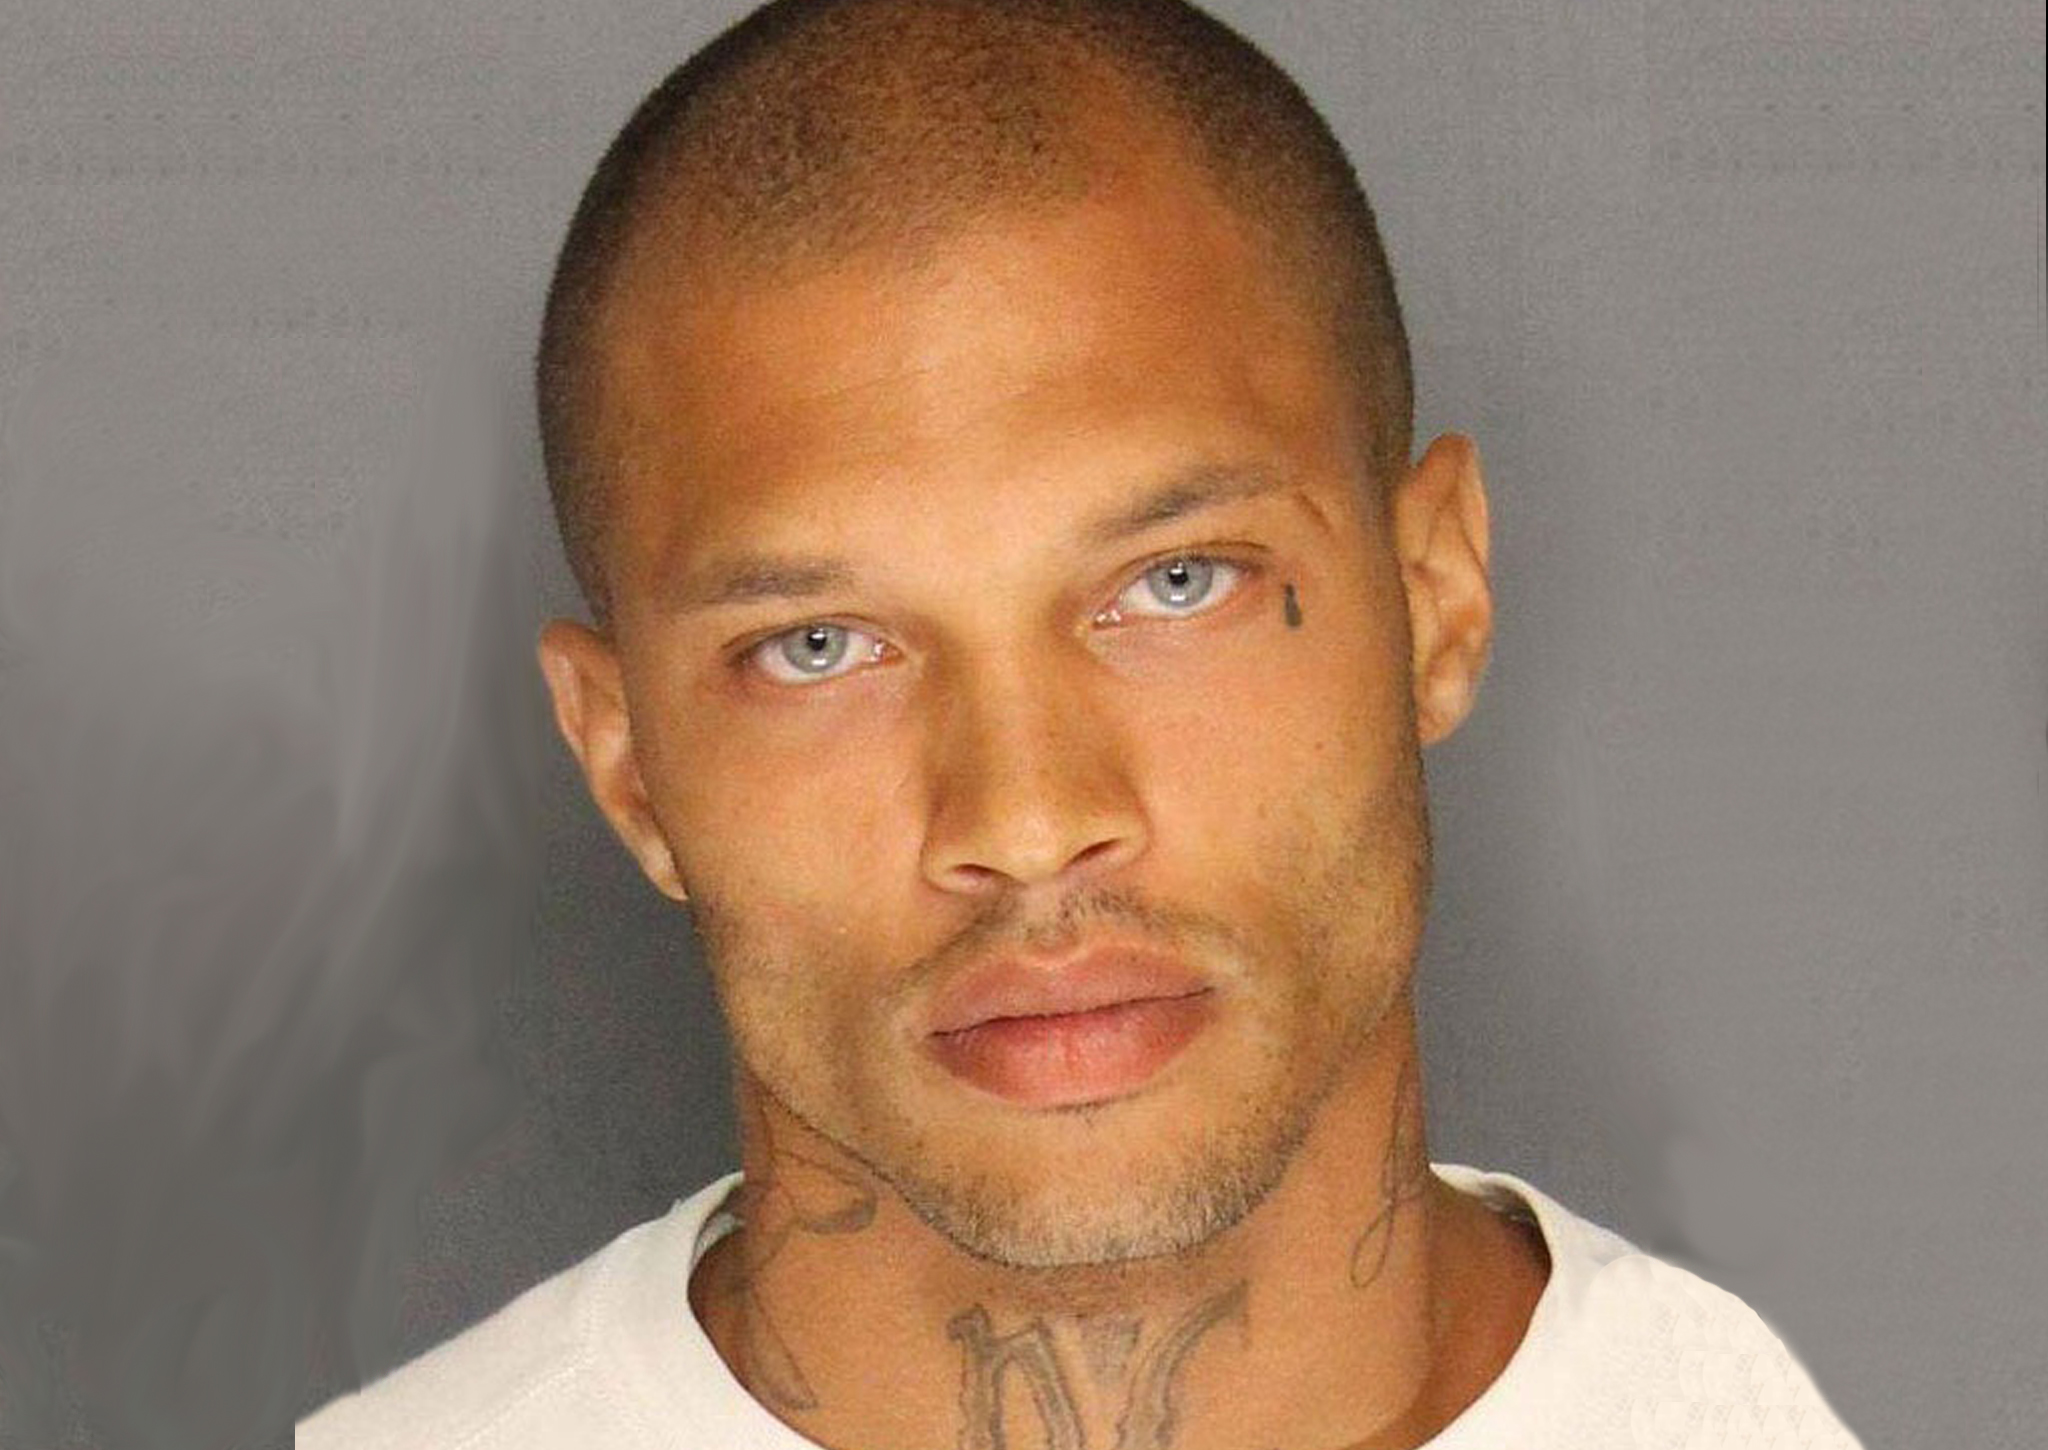 Do We As Gay Men Actually Find Jeremy Meeks Hot? | Instinct